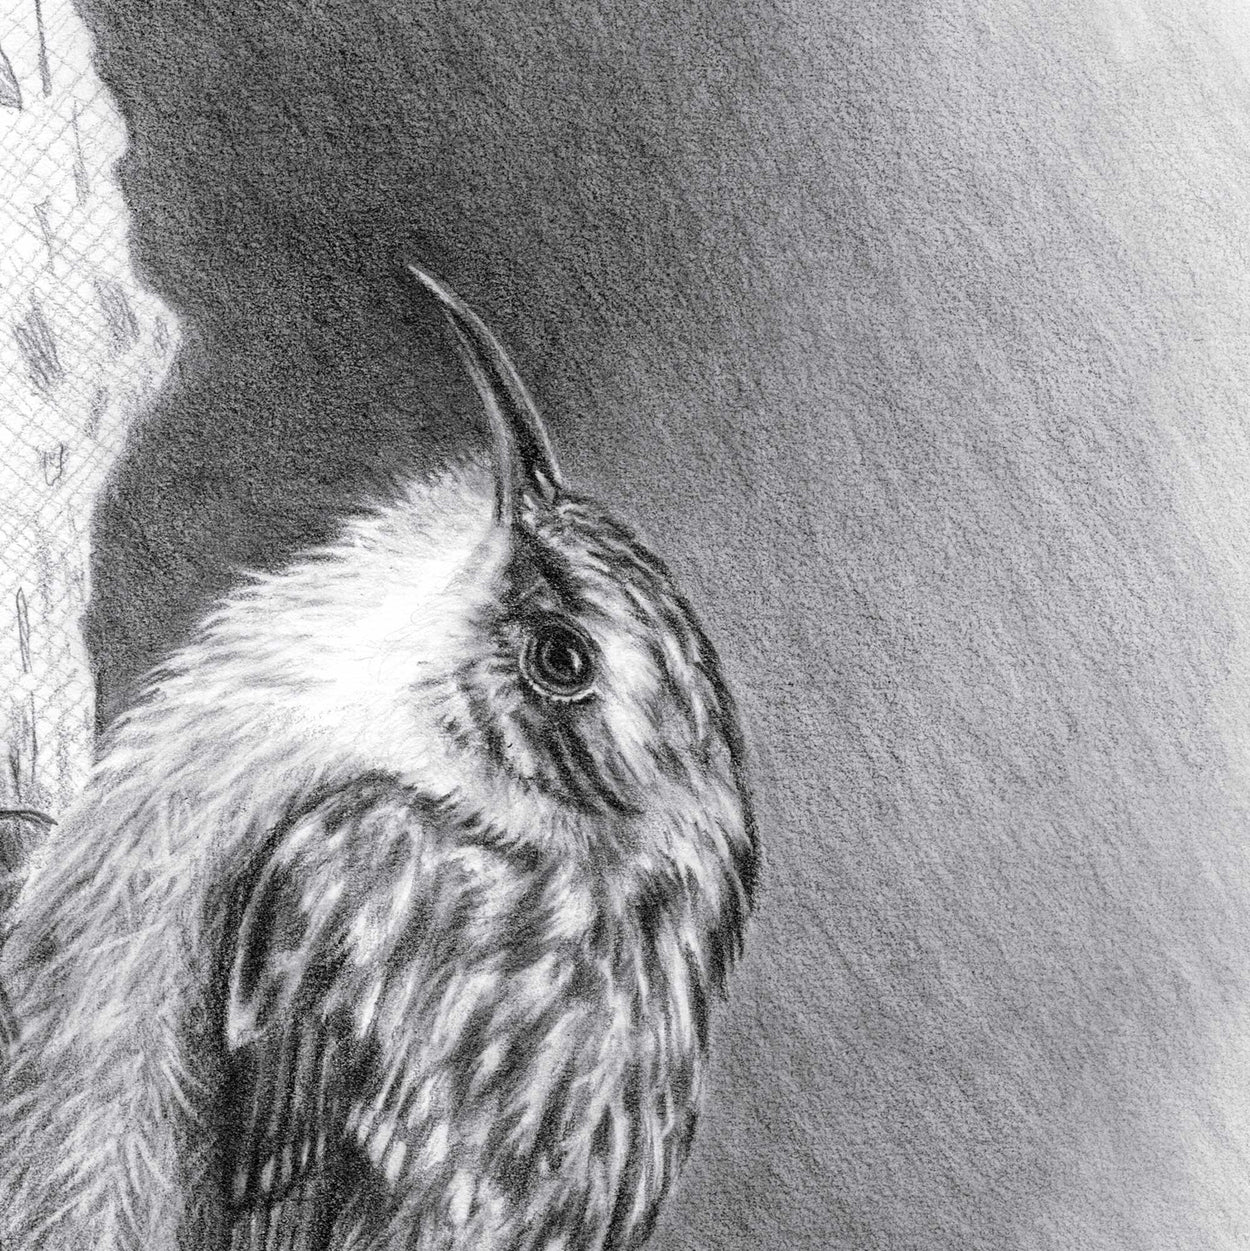 Close-up detail of a pencil drawing of a treecreeper bird's head